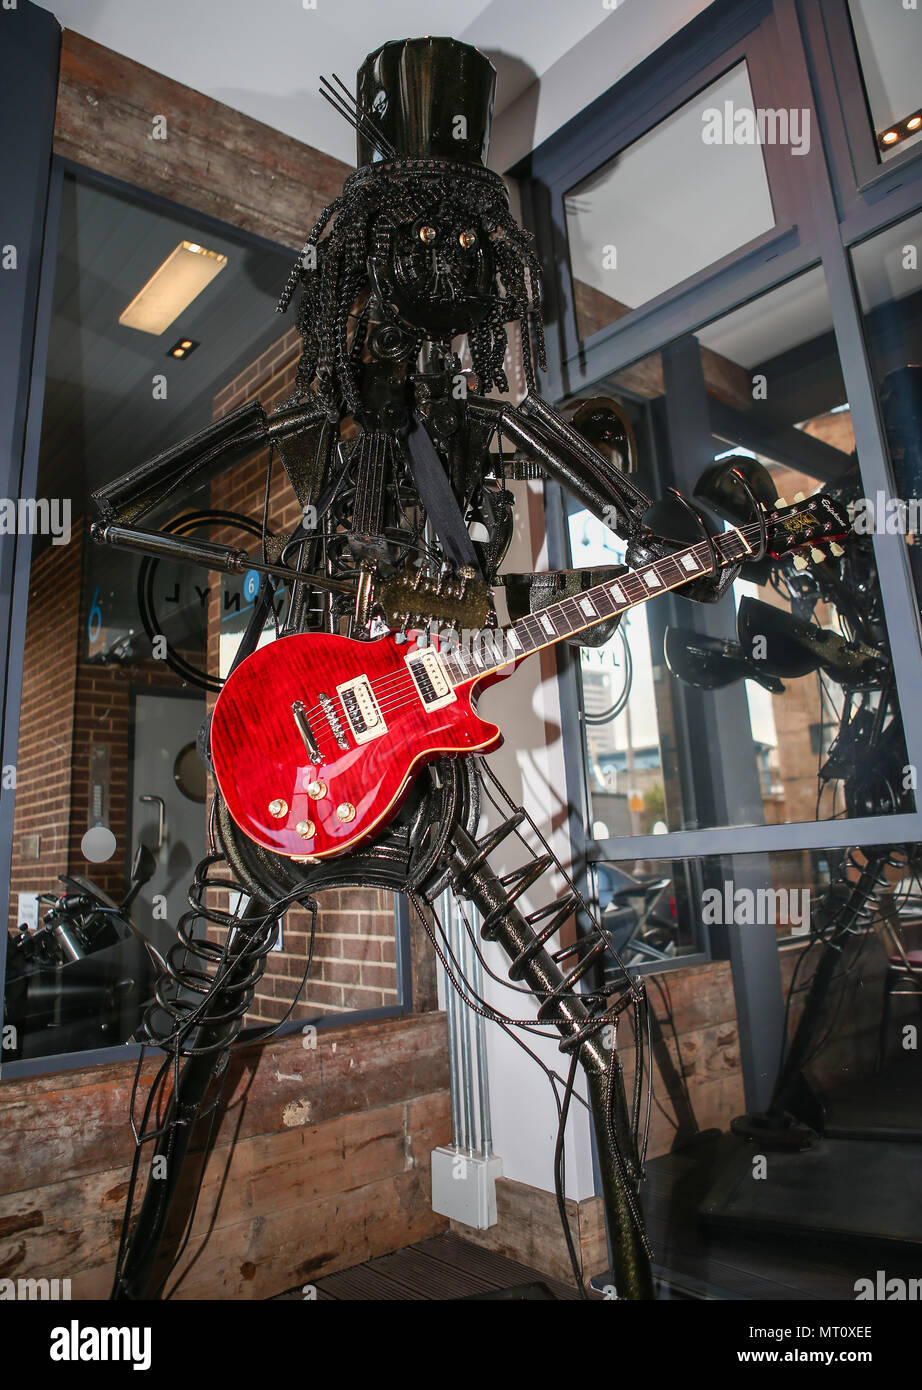 A unique sculpture of rock musician Slash is going under the hammer.  The larger-than-life, 7.5 feet tall work has been painstakingly fashioned from recycled car, bike and instrument parts.  Officially signed by Slash in two places, it is the work of artist Simon Weitzman and welder/finisher Darren Kenny, of Heavy Metal Sculptures (https://www.heavymetalsculptures.com/)  It was made to benefit IFAW, the International Fund for Animal Welfare, of which Slash acts as an ambassador, and comes fitted with a Slash signature guitar.  The piece has a starting bid of £1,800 and will be sold by Omega Au Stock Photo